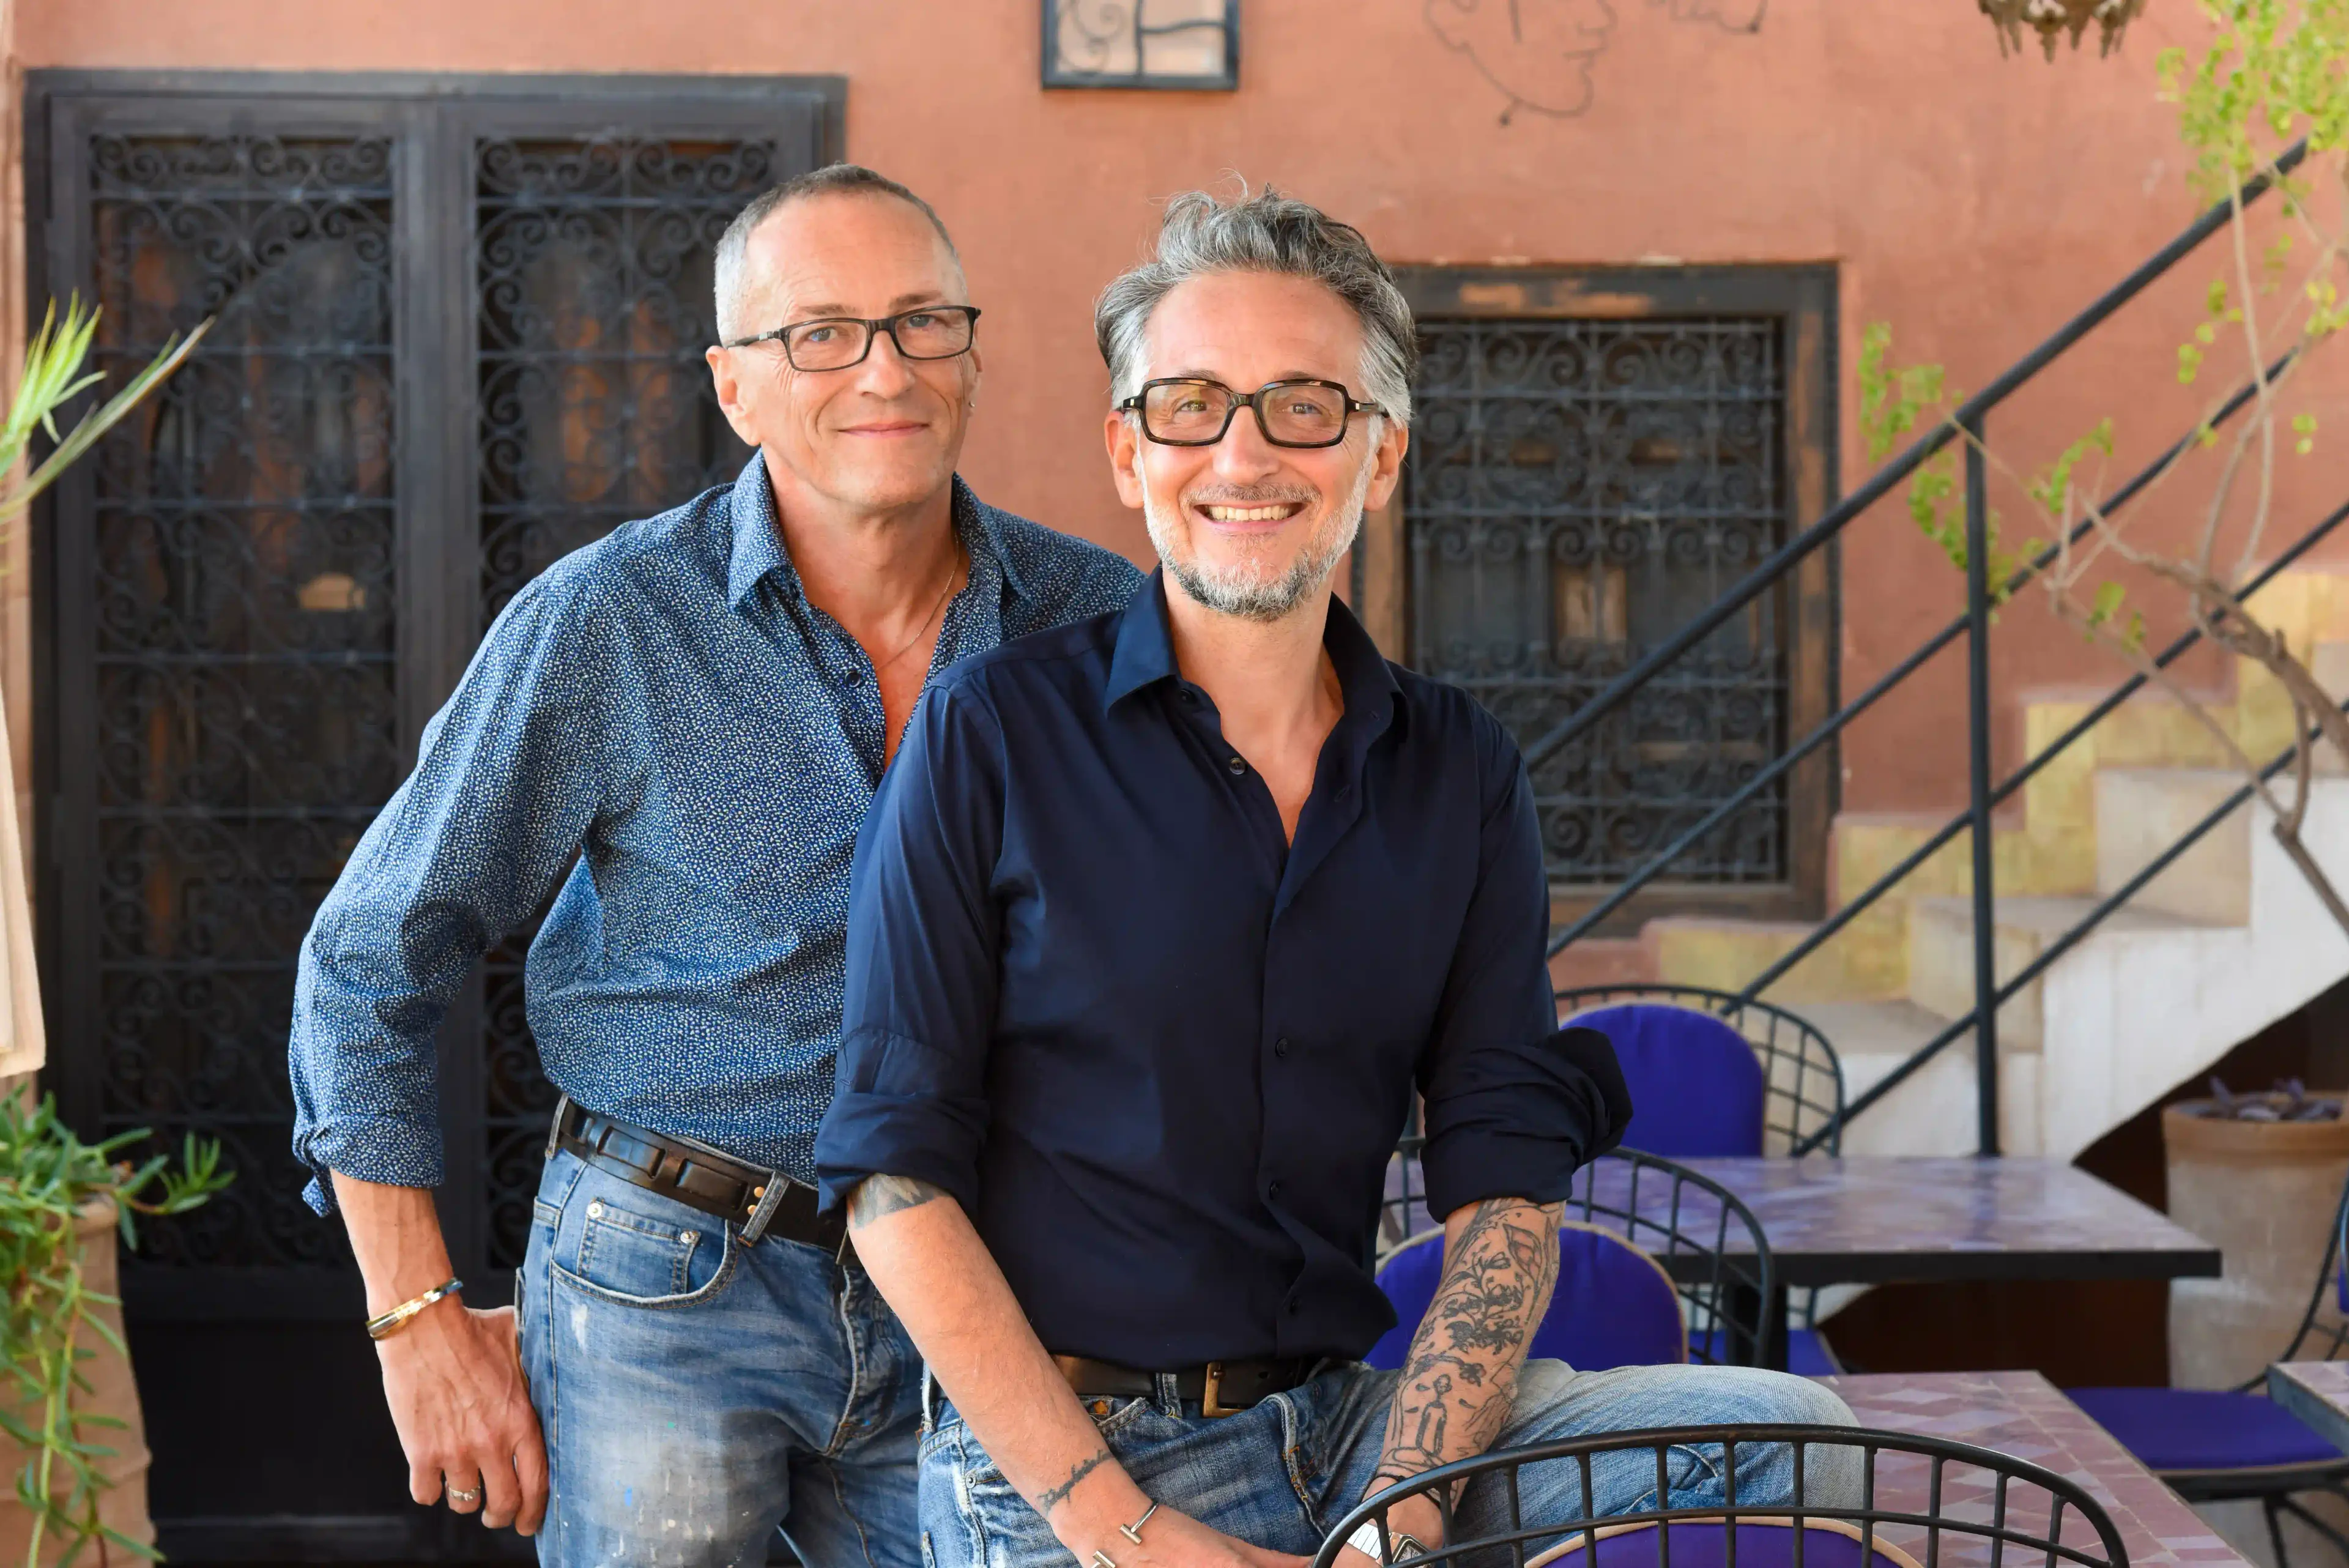 The owners of the guesthouse, Didier and Eric